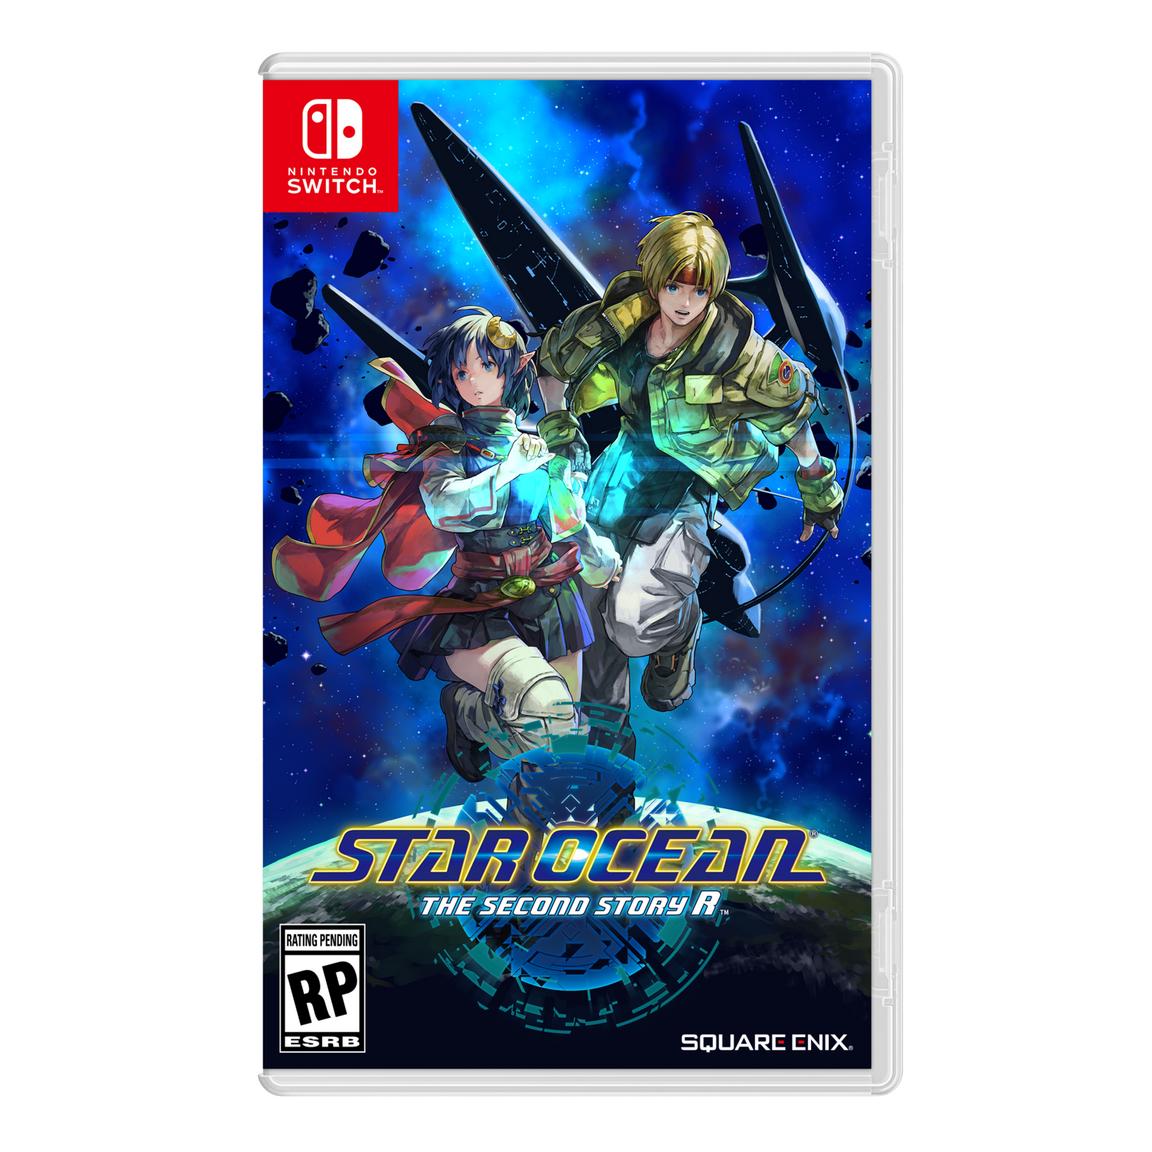 ps4 игра square enix star ocean the divine force Видеоигра Star Ocean: The Second Story R - Nintendo Switch